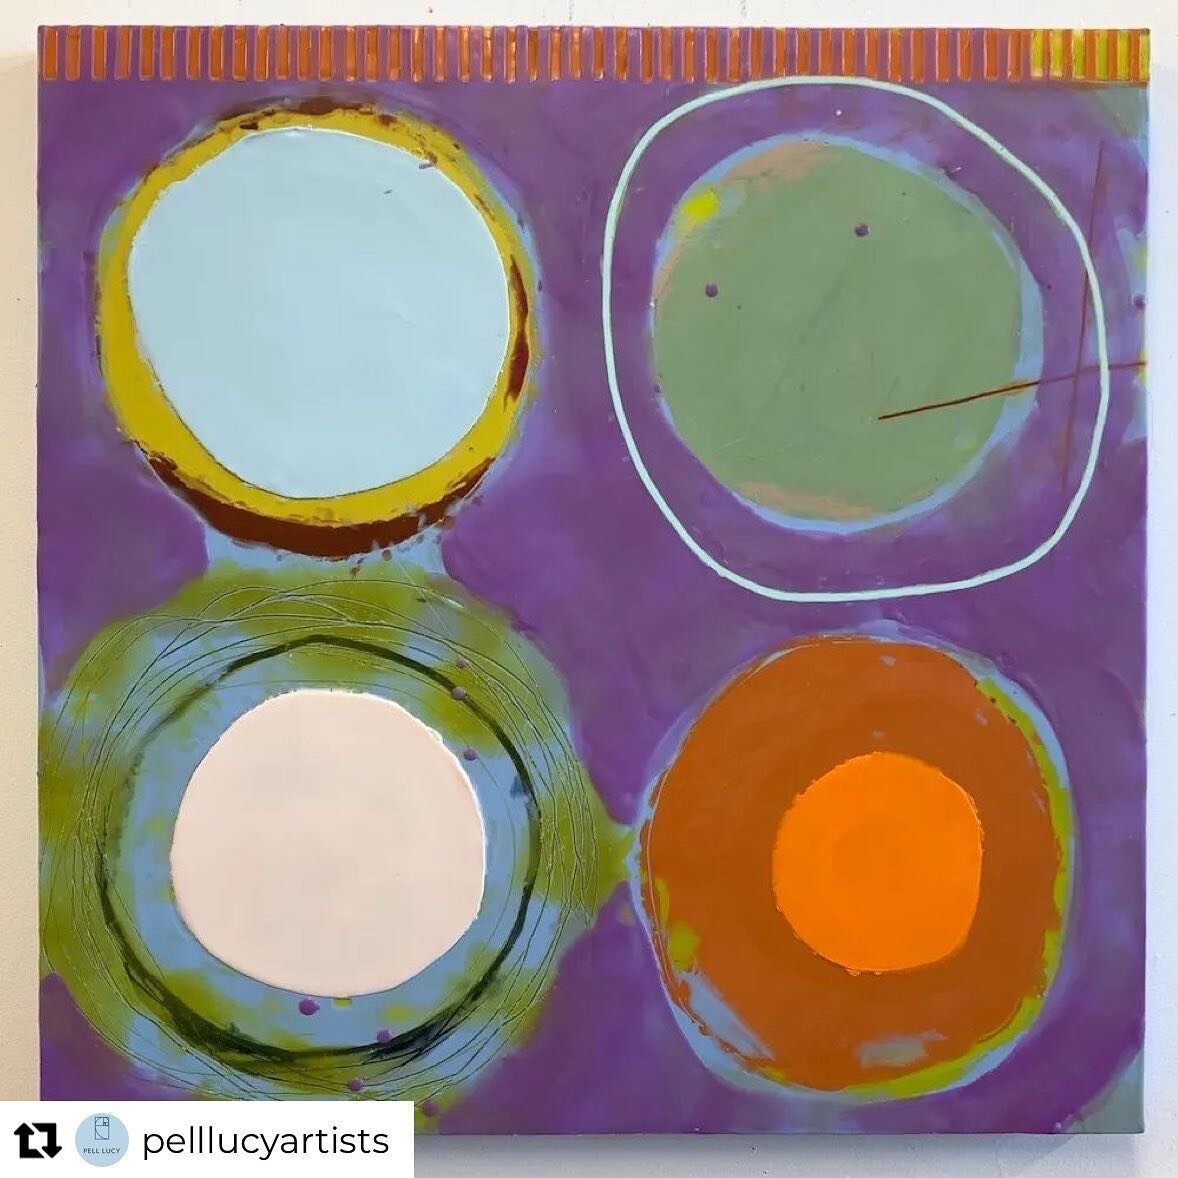 Repost from @pelllucyartists
&bull;
Be Happy, by Deborah Peeples (Encaustic on panel, 24 &times; 24.&quot;) Her work is also featured in the latest Pell Lucy online exhibit, More Seeingly, now on Artsy.net. Link in bio.

From the curatorial statement